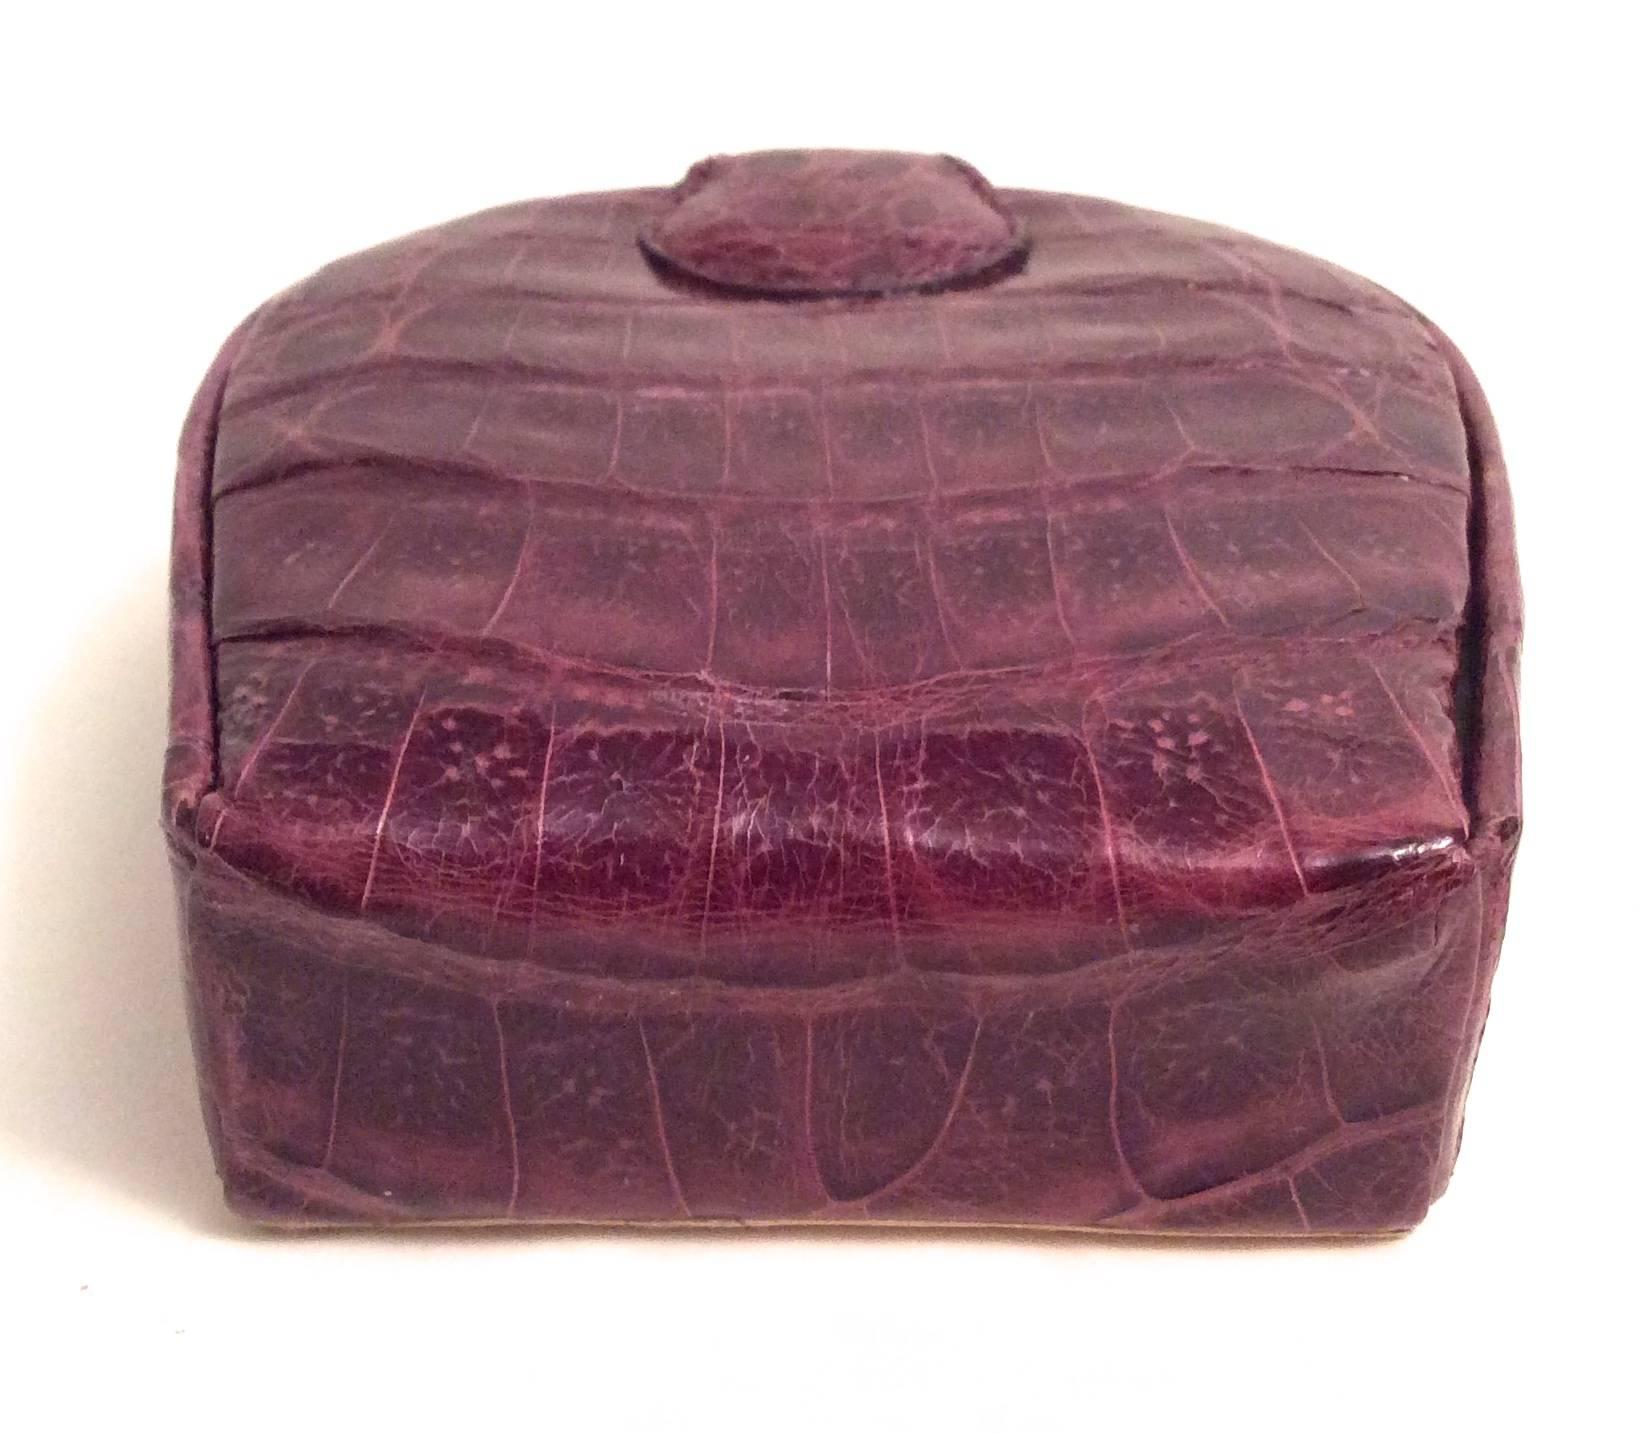 Here is a remarkably crafted alligator case that is excellent for holding small jewelry or other small objects. It is beautifully crafted in crocodile skin and is purple on the exterior with a soft beige leather on the interior. There is an insert